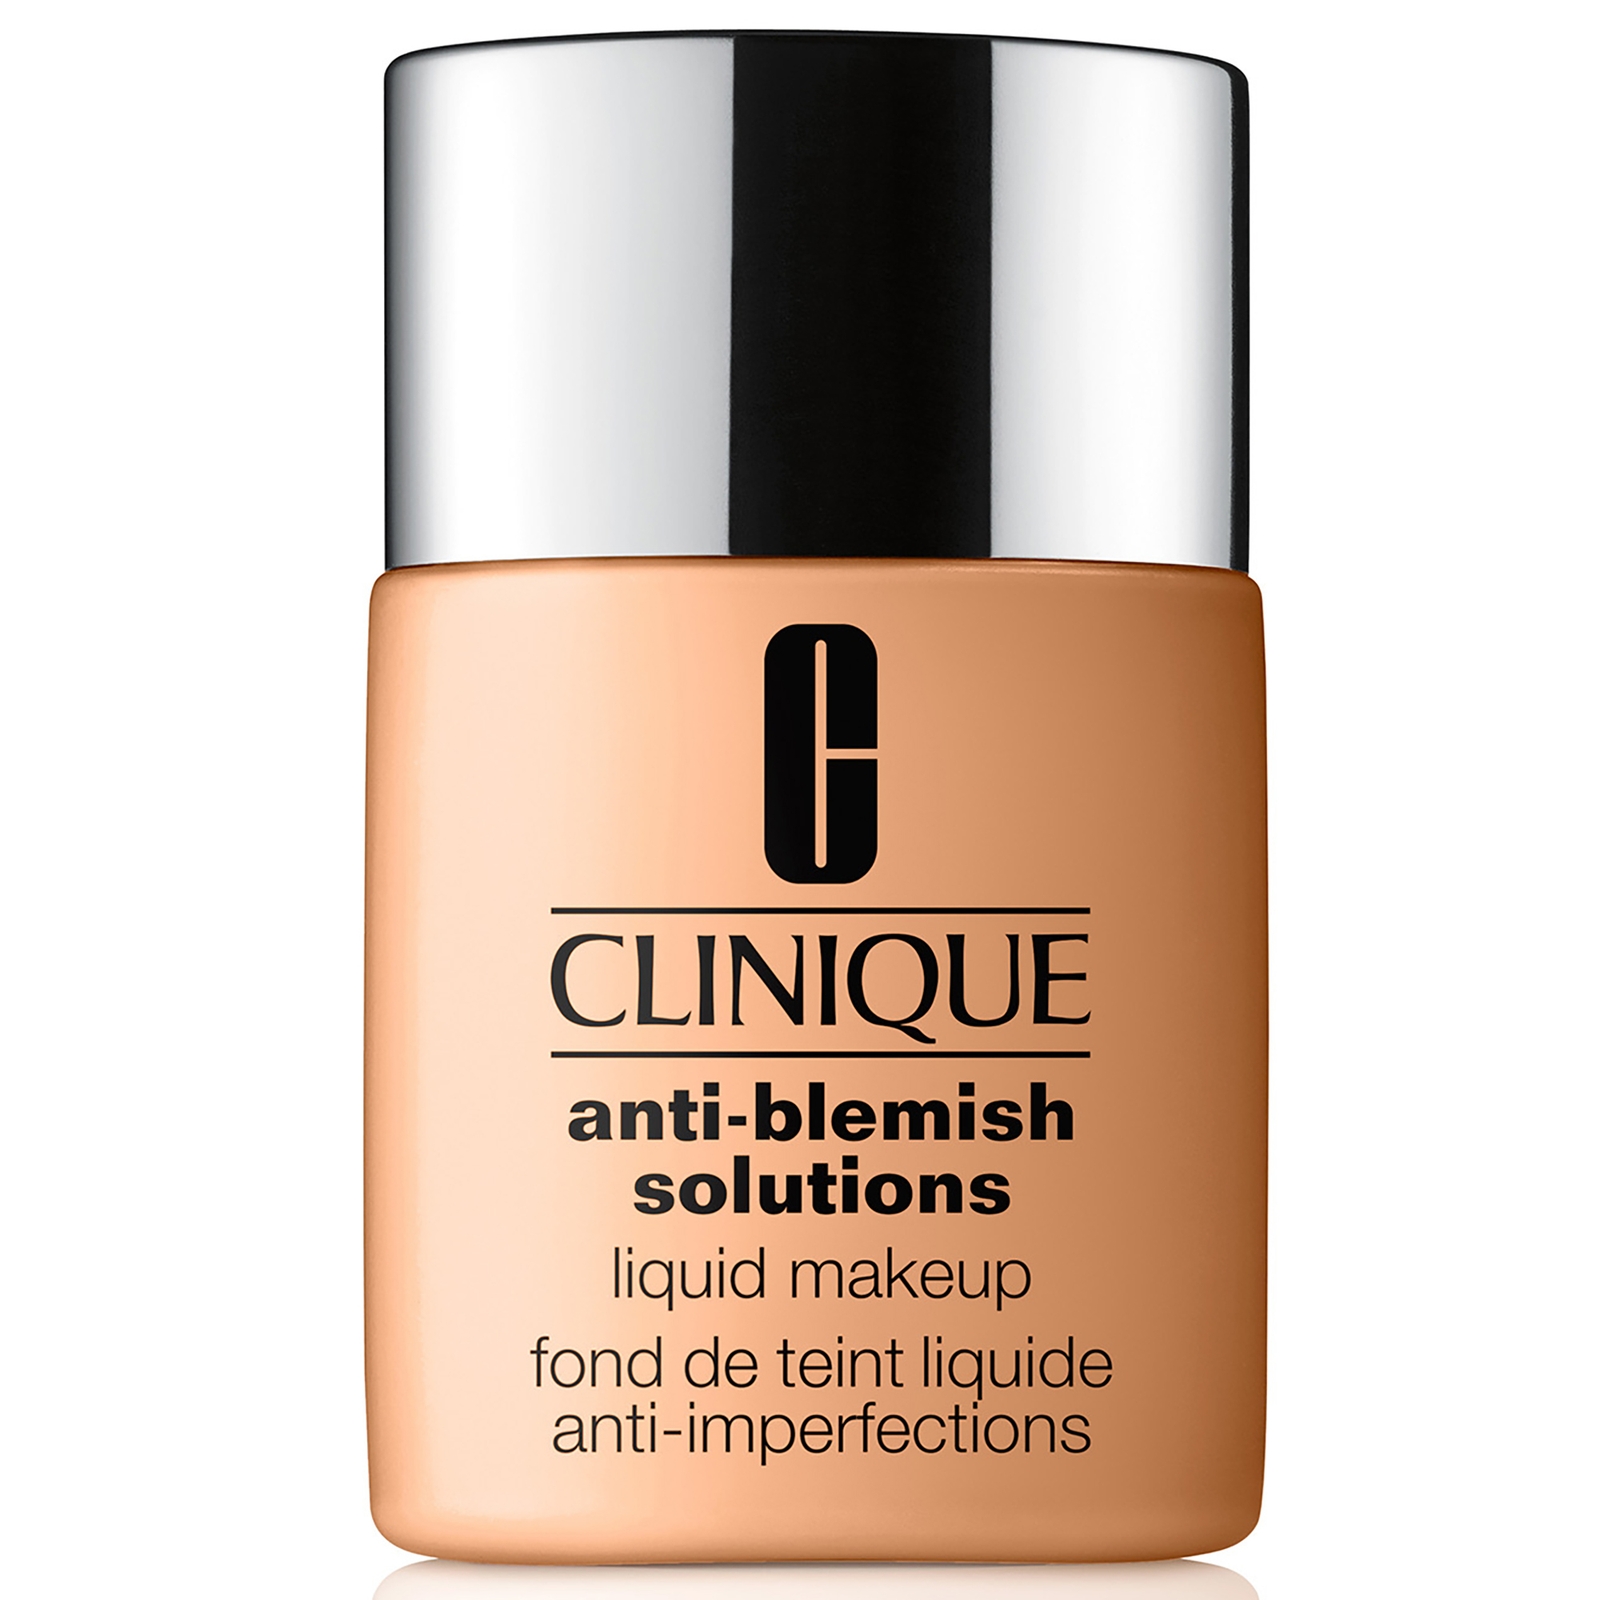 Image of Clinique Anti-Blemish Solutions Liquid Makeup with Salicylic Acid 30ml (Various Shades) - WN 46 Golden Neutral